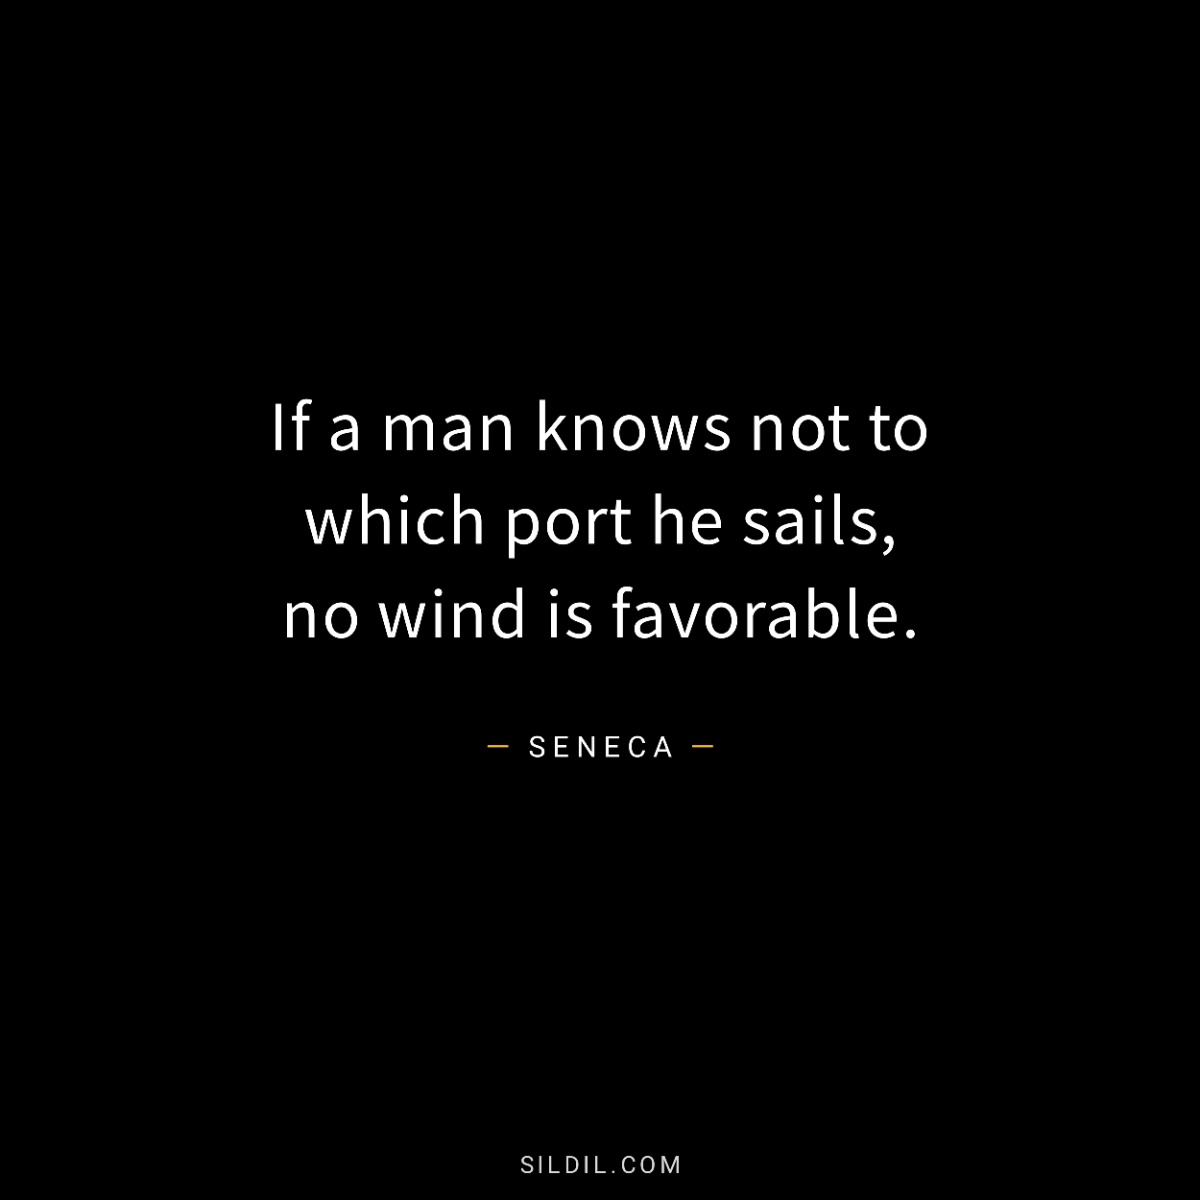 If a man knows not to which port he sails, no wind is favorable.